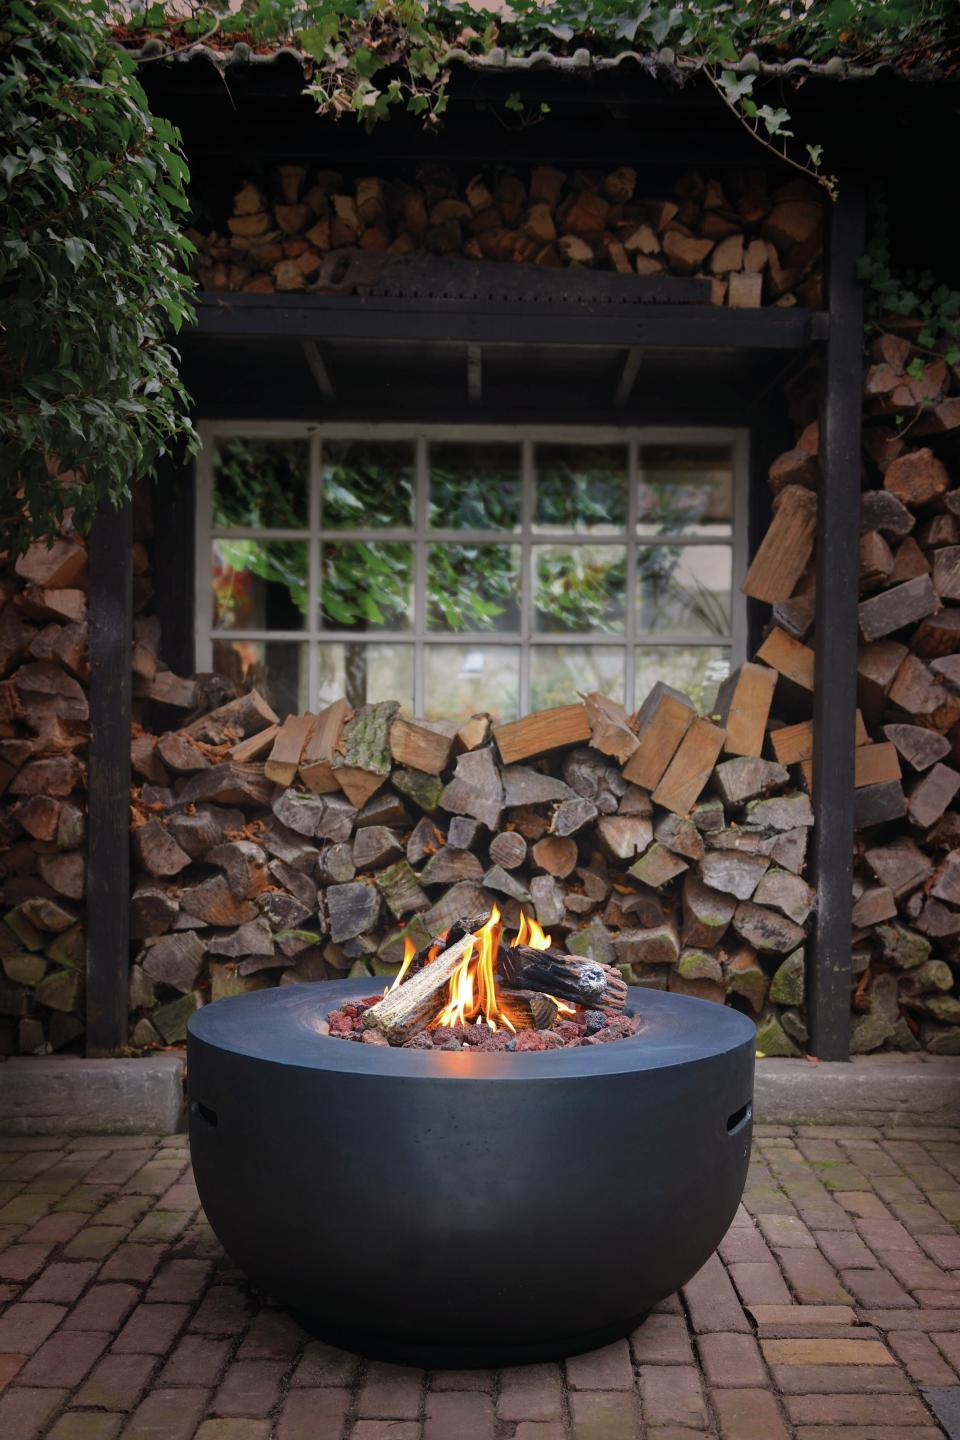 Live in a cooler climate? A gas fire pit will keep you cozy